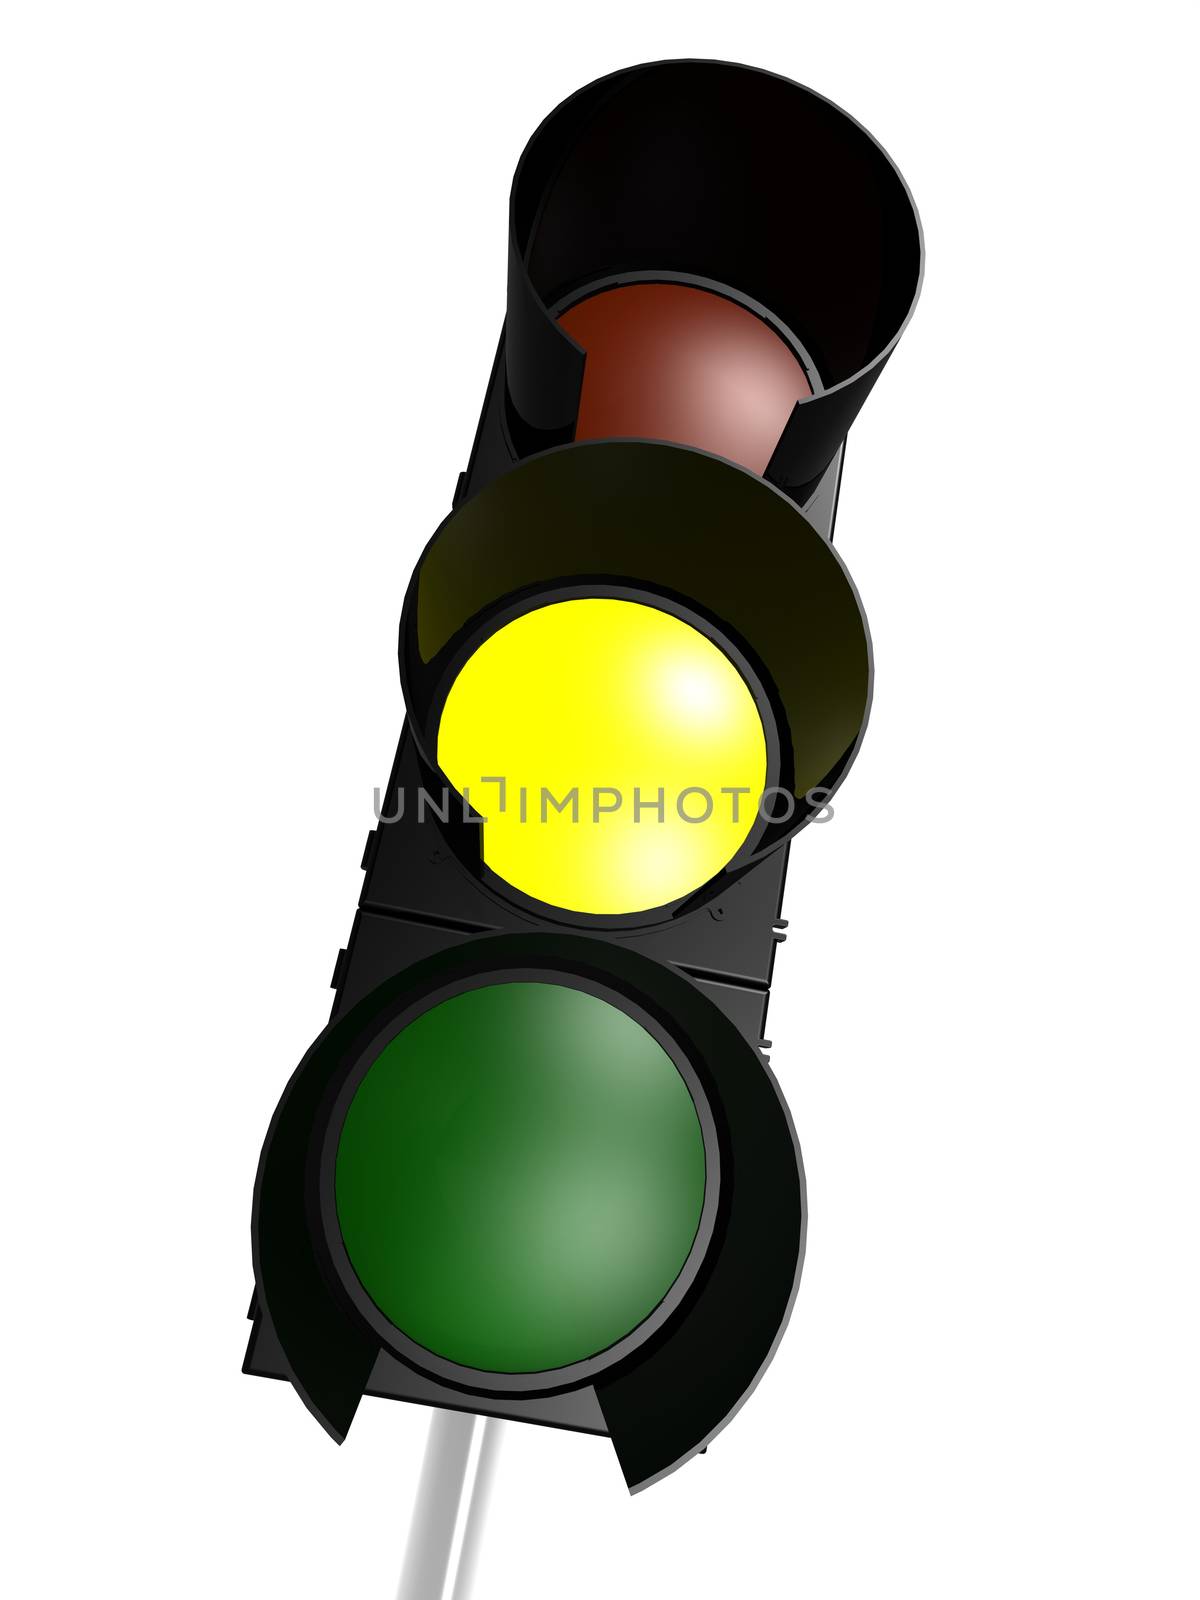 Traffic light with yellow on by tang90246